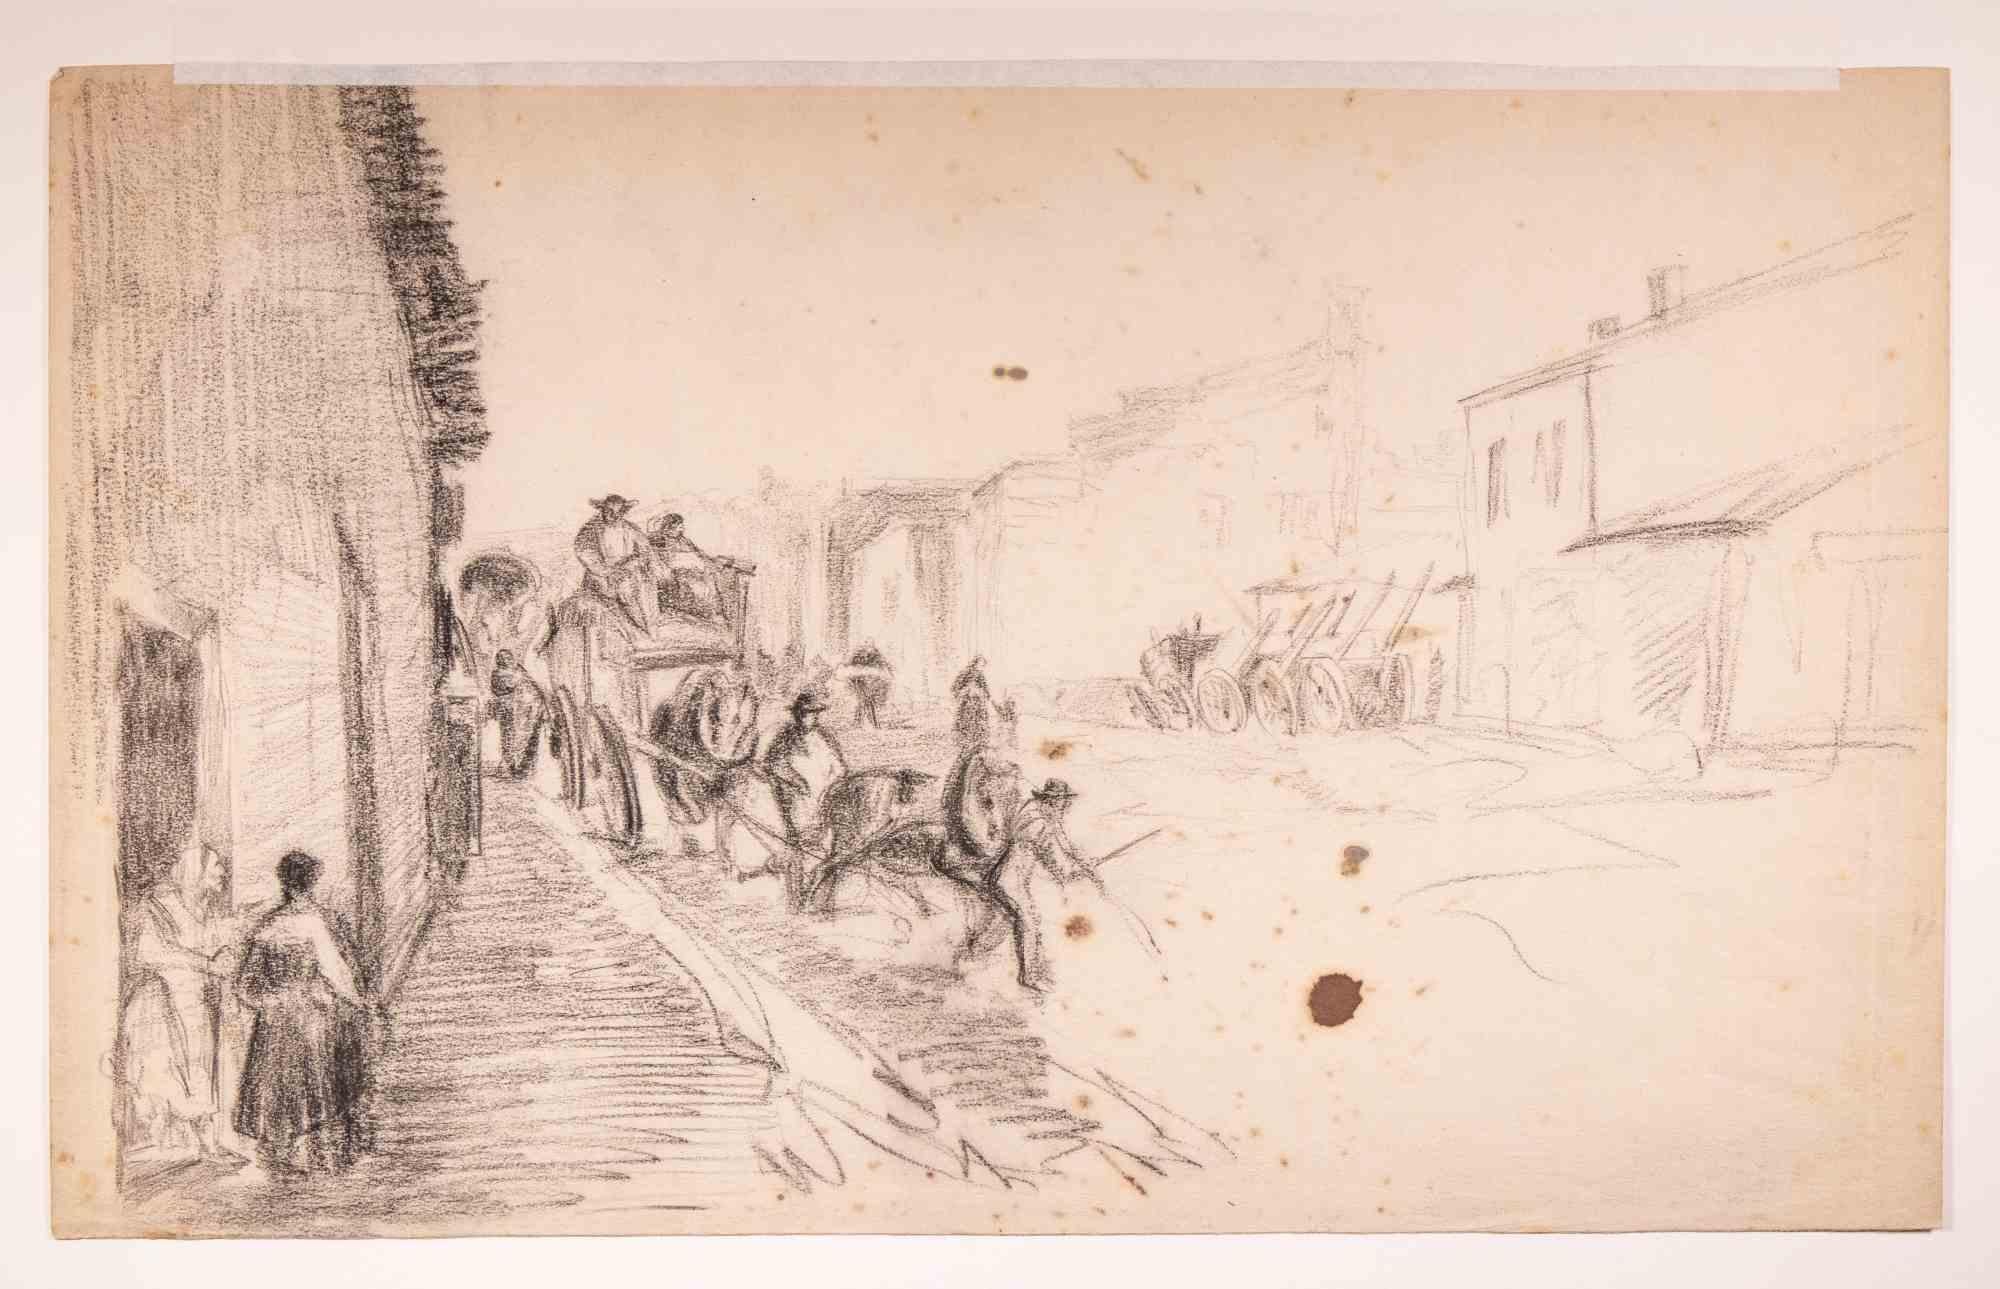 Carriage is an Original Drawing in Charcoal realized by Edouard Dufeu (1840-1900).

Good conditions except for diffused foxings.

The Artwork is depicted through strong strokes in a well-balanced composition.

 

 

 

 

 